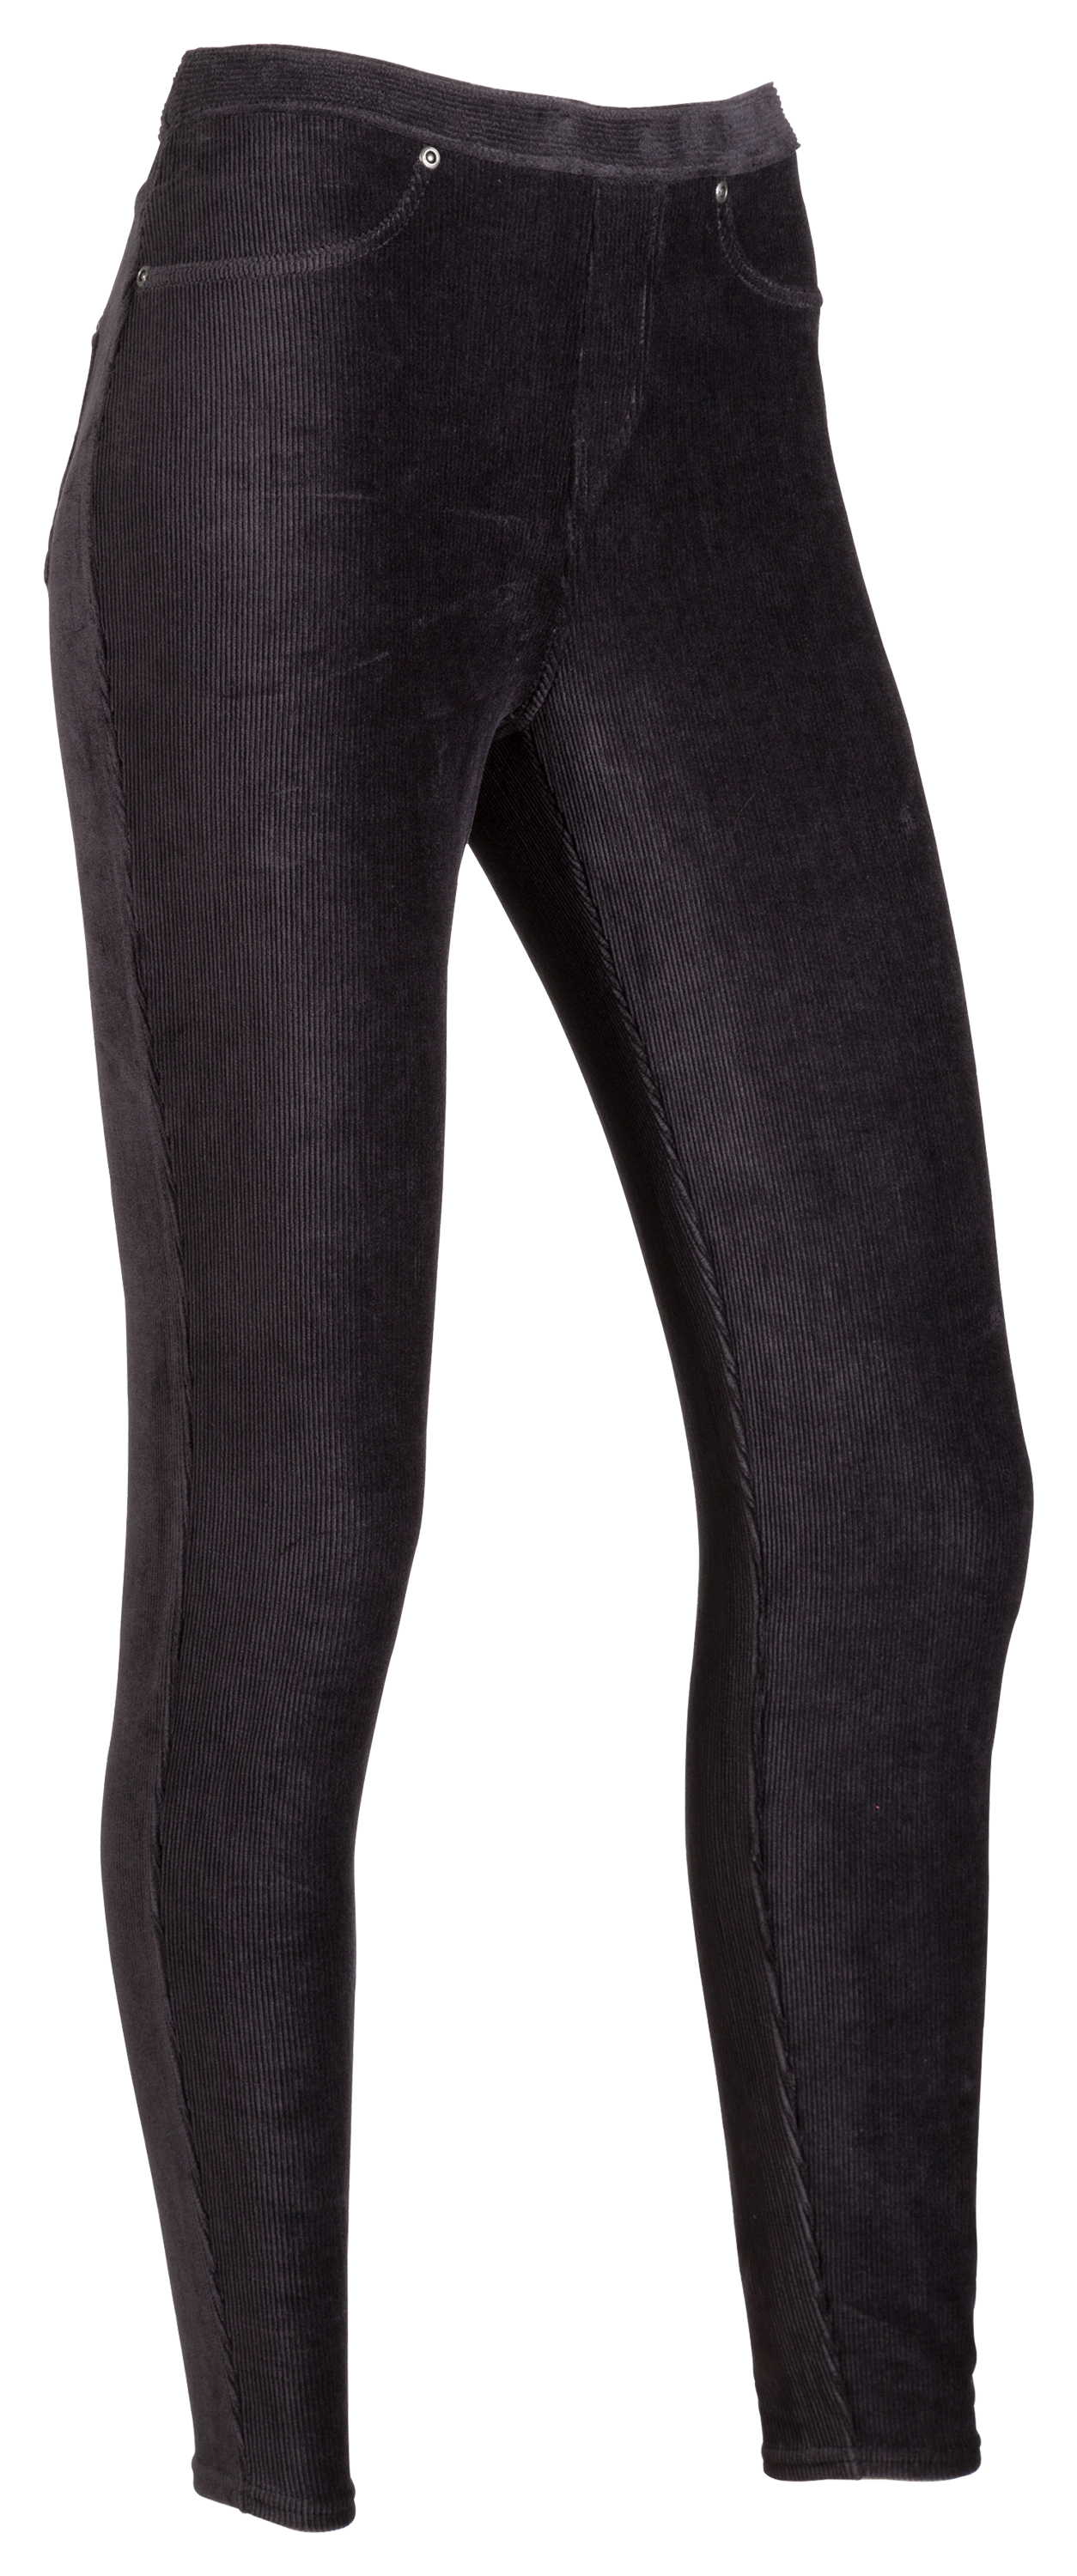 Natural Reflections Cord Leggings for Ladies | Bass Pro Shops